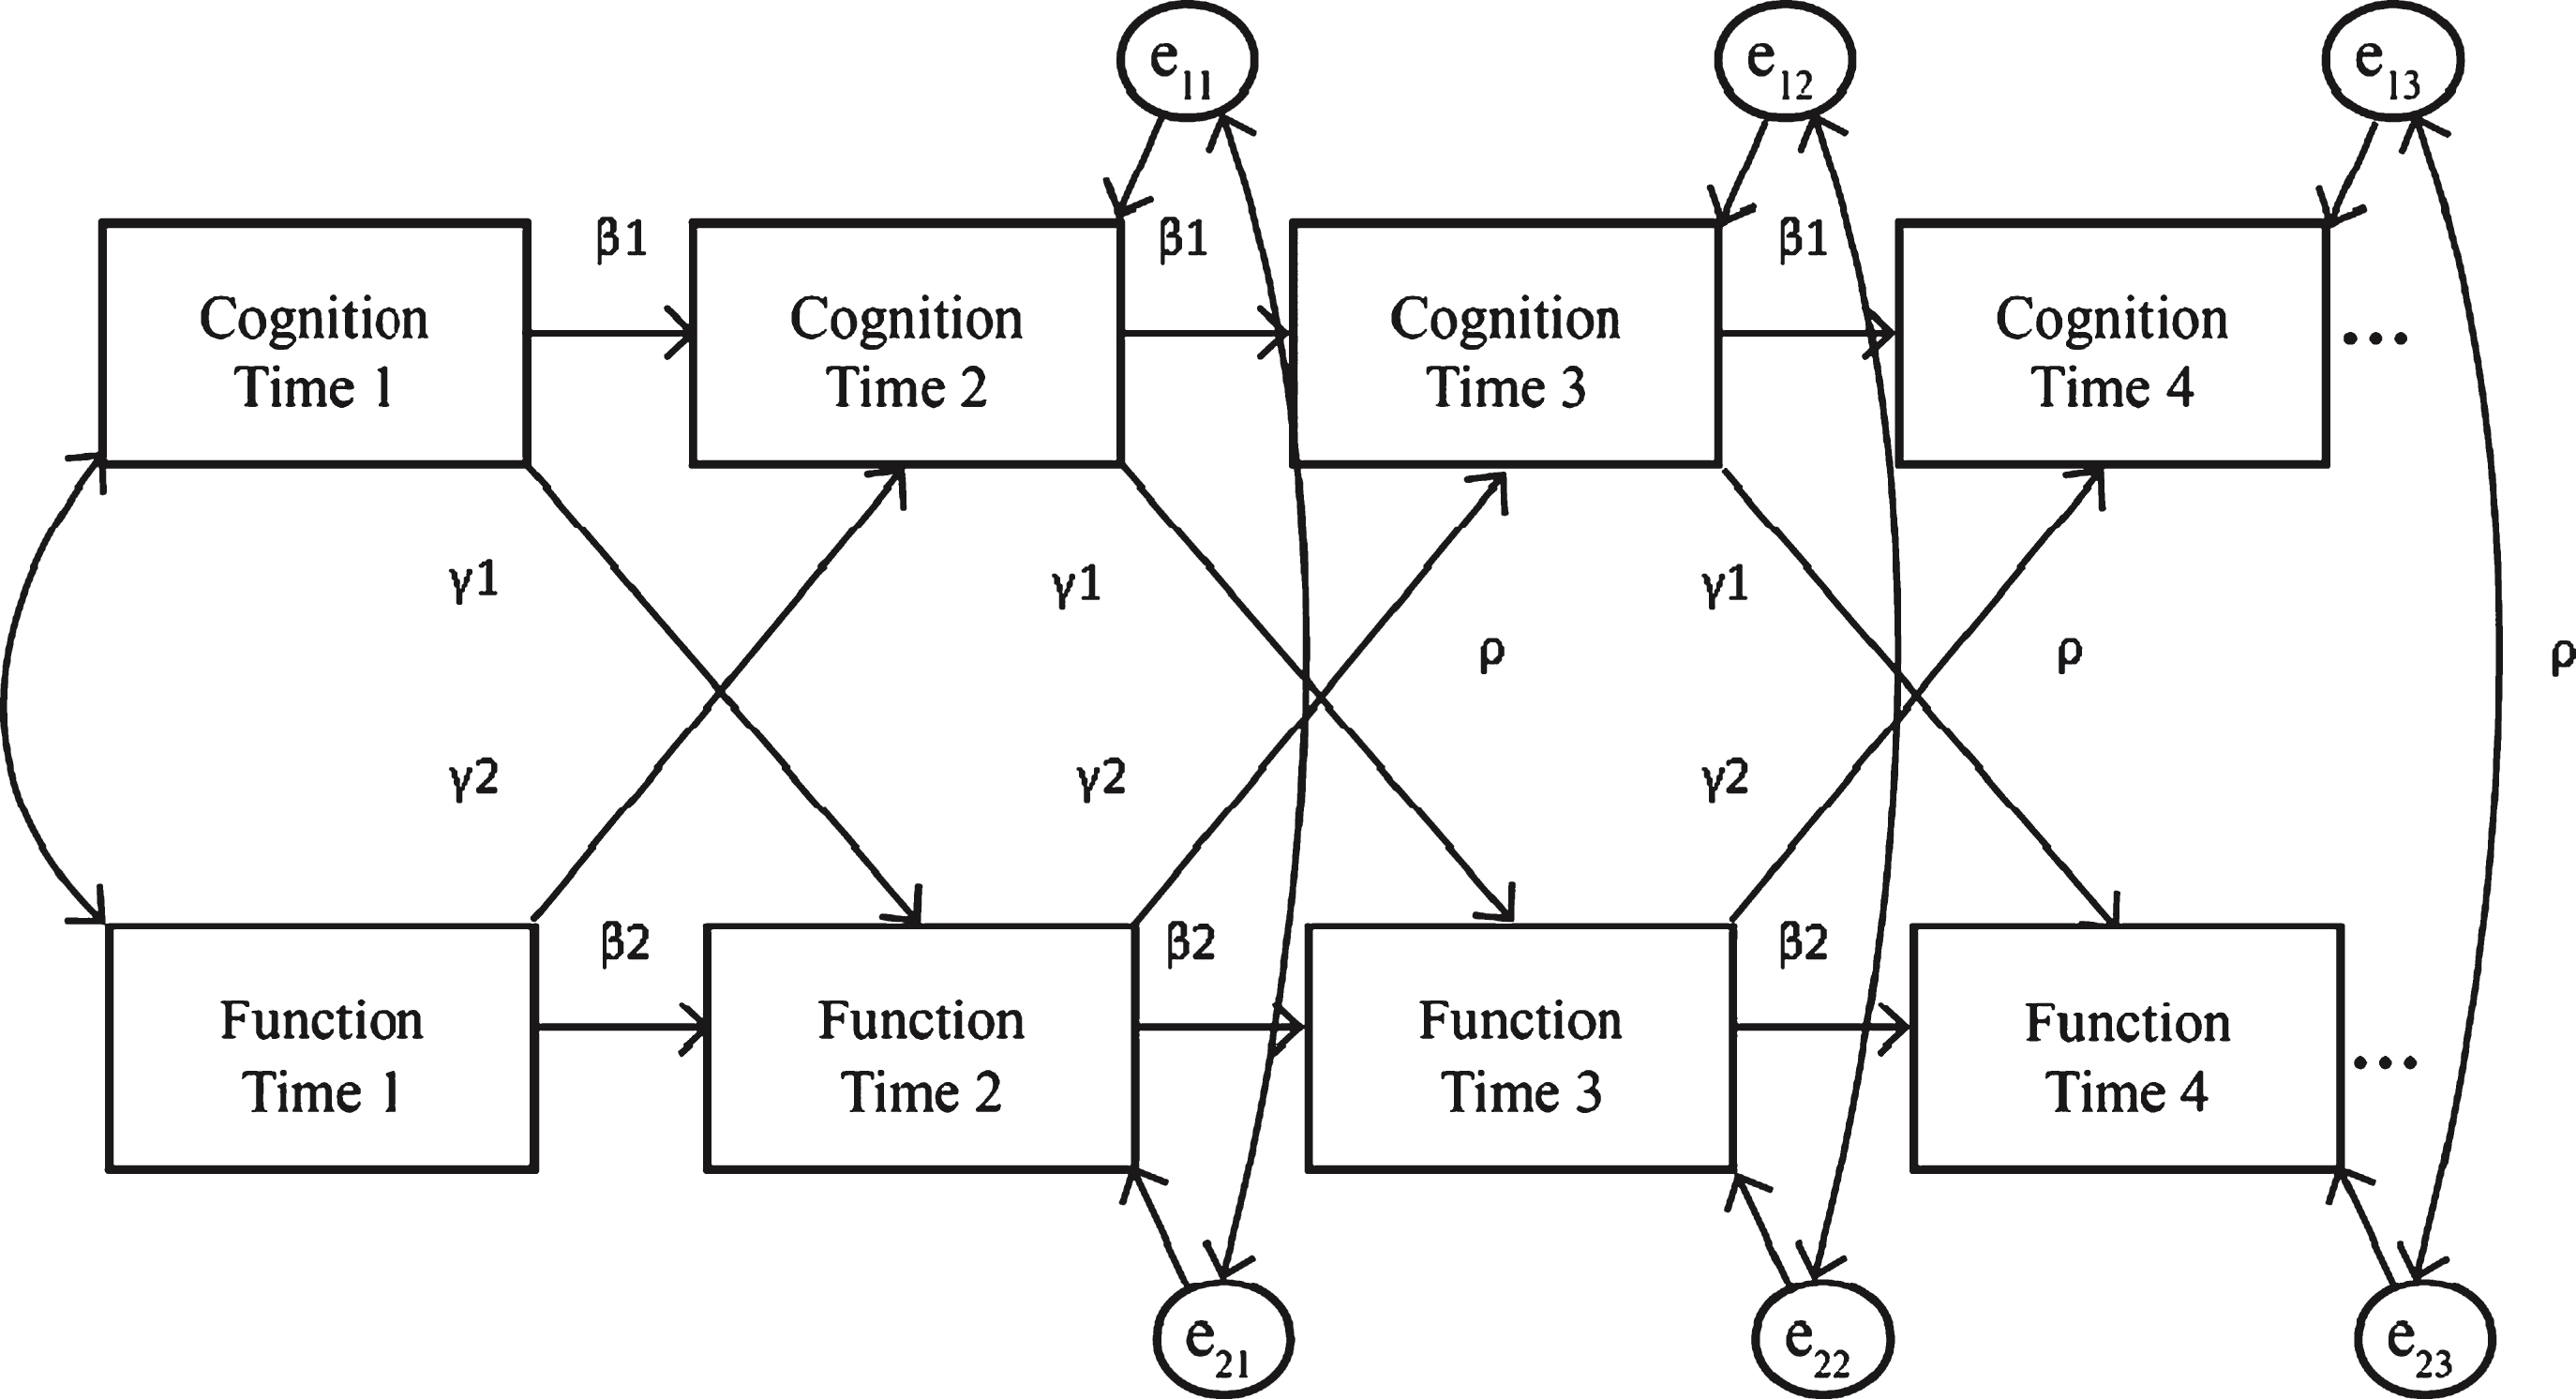 Path diagram of the autoregressive cross-lagged panel analysis model to assess the interrelationship between cognitive and functional longitudinal data. Autoregressive and cross-lagged coefficients (β, γ) were estimated from time (t-1) to time (t) for cognition and function, and the correlations between the two outcome variables (ρ) was also estimated (modified from Zahodne et al. [24]).